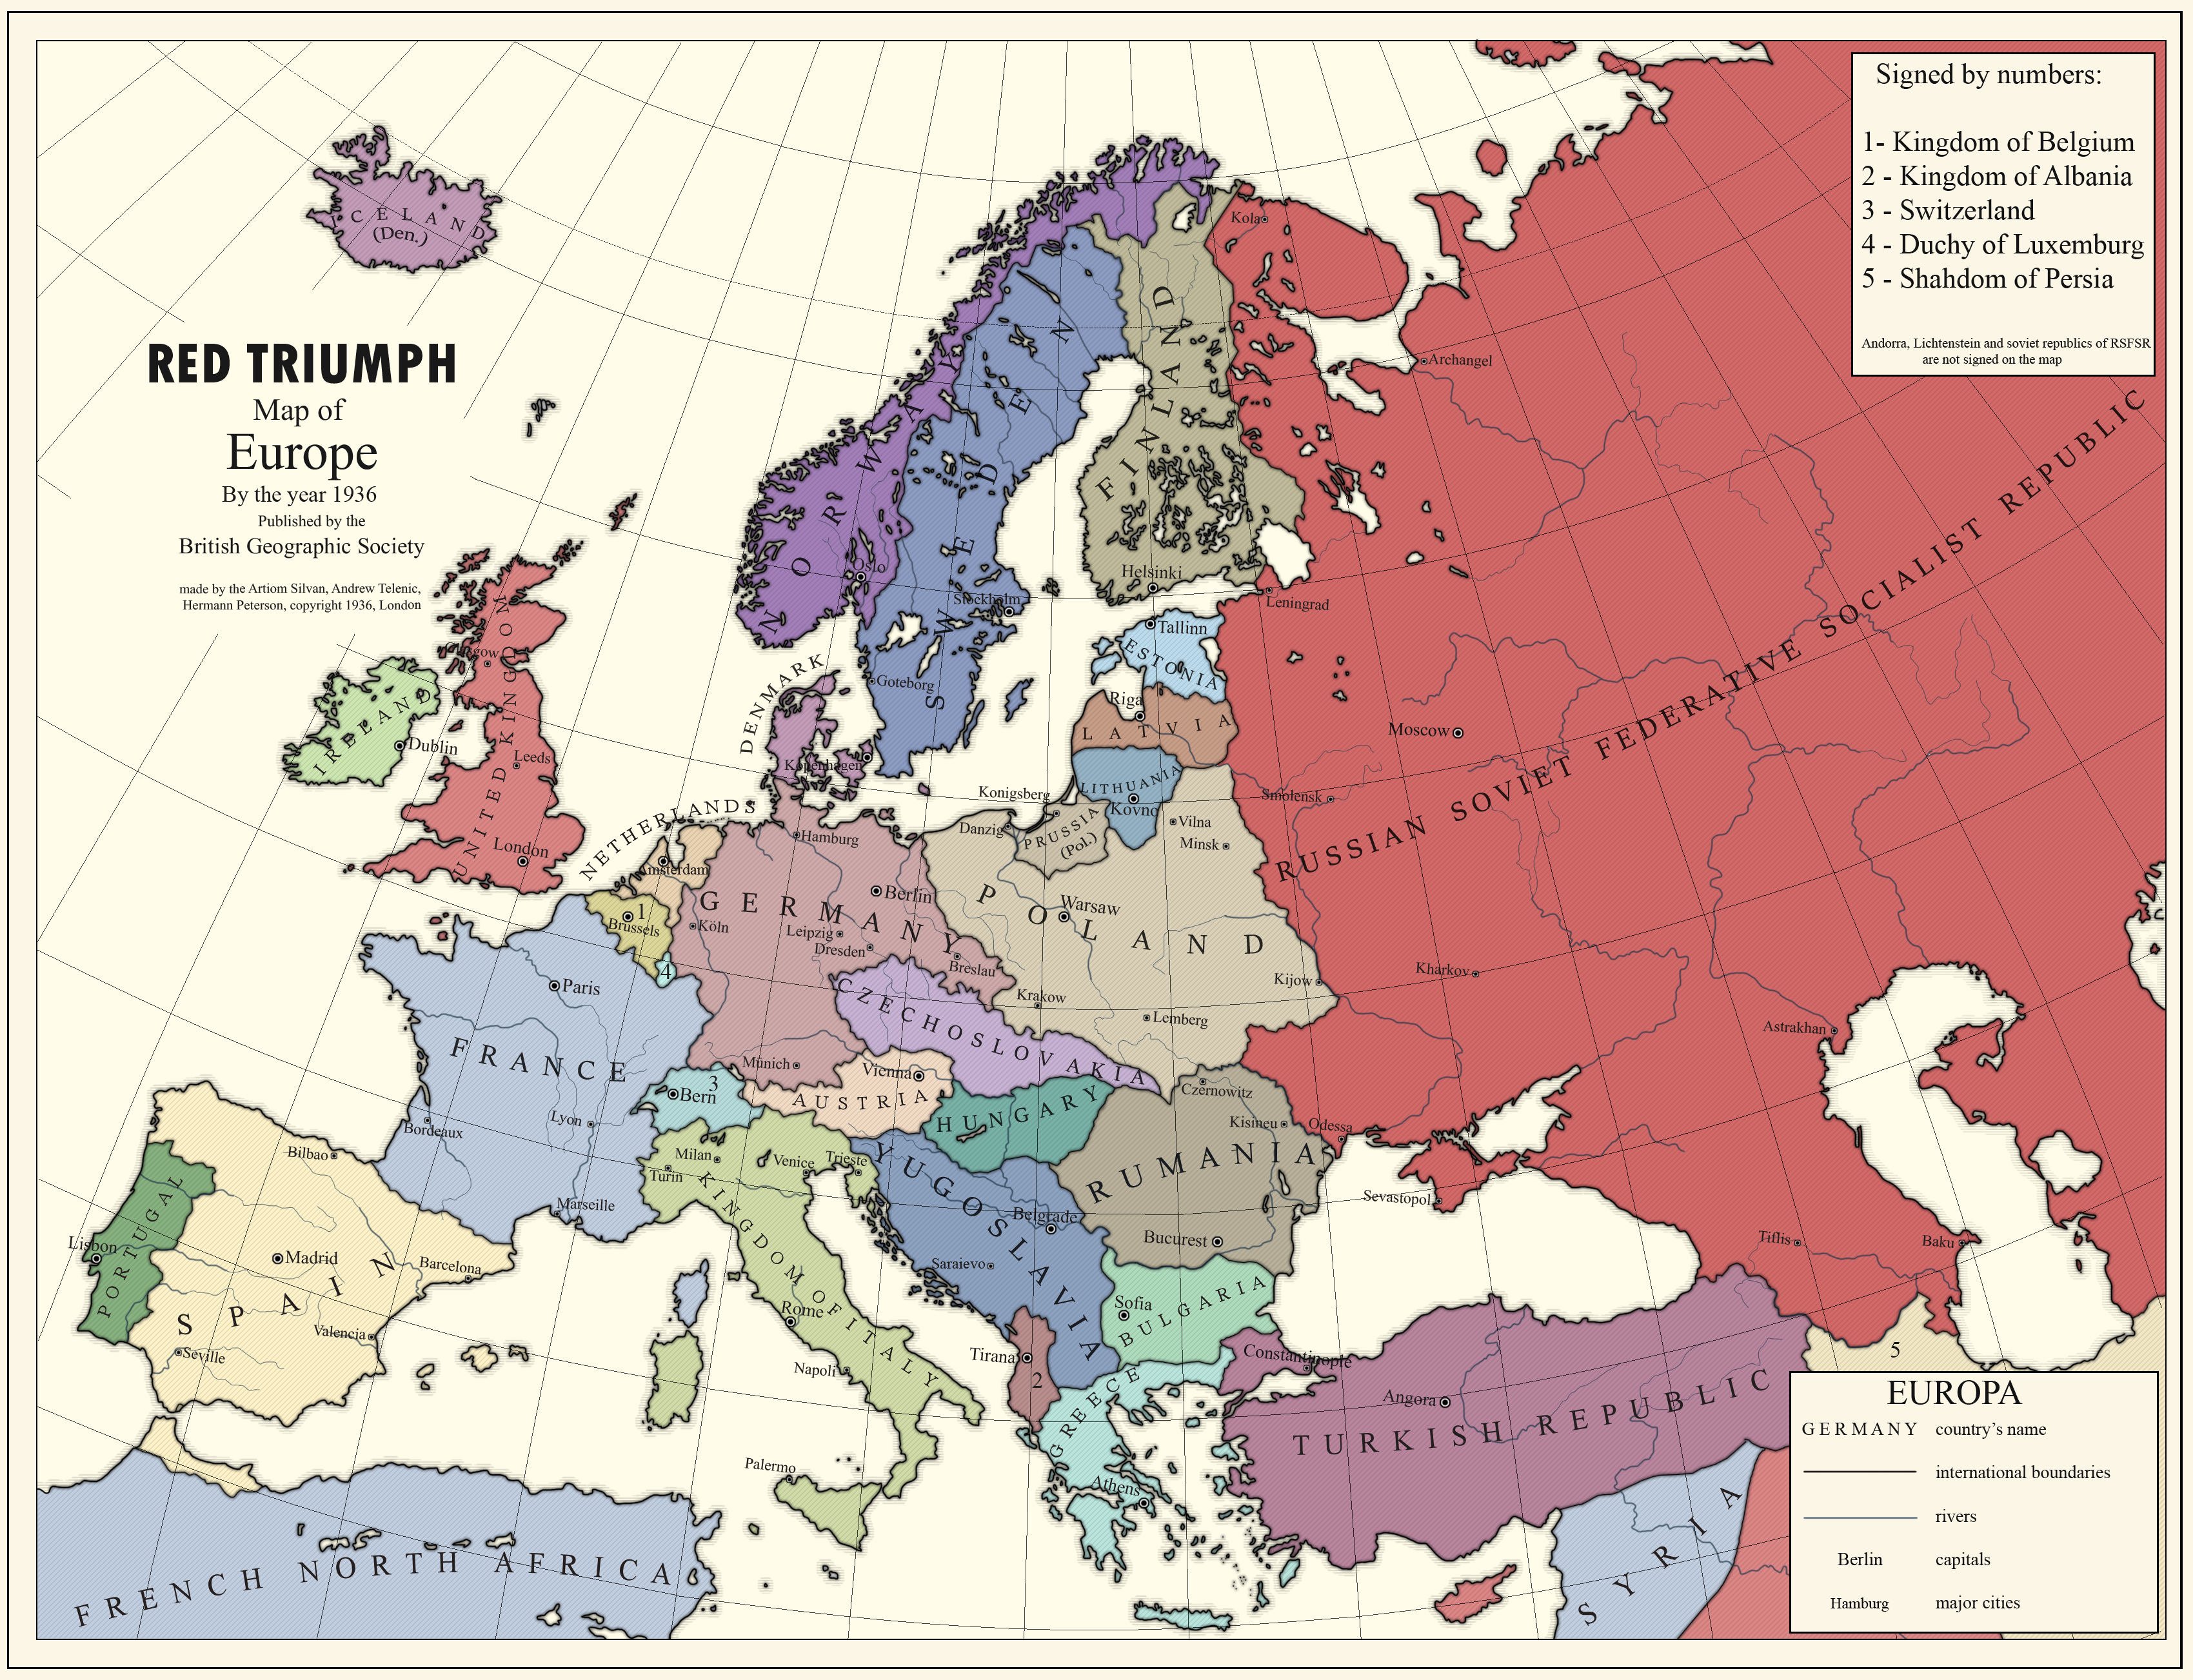 [RED TRIUMPH] Map of Europe by the 1936 by kreiviskai on DeviantArt